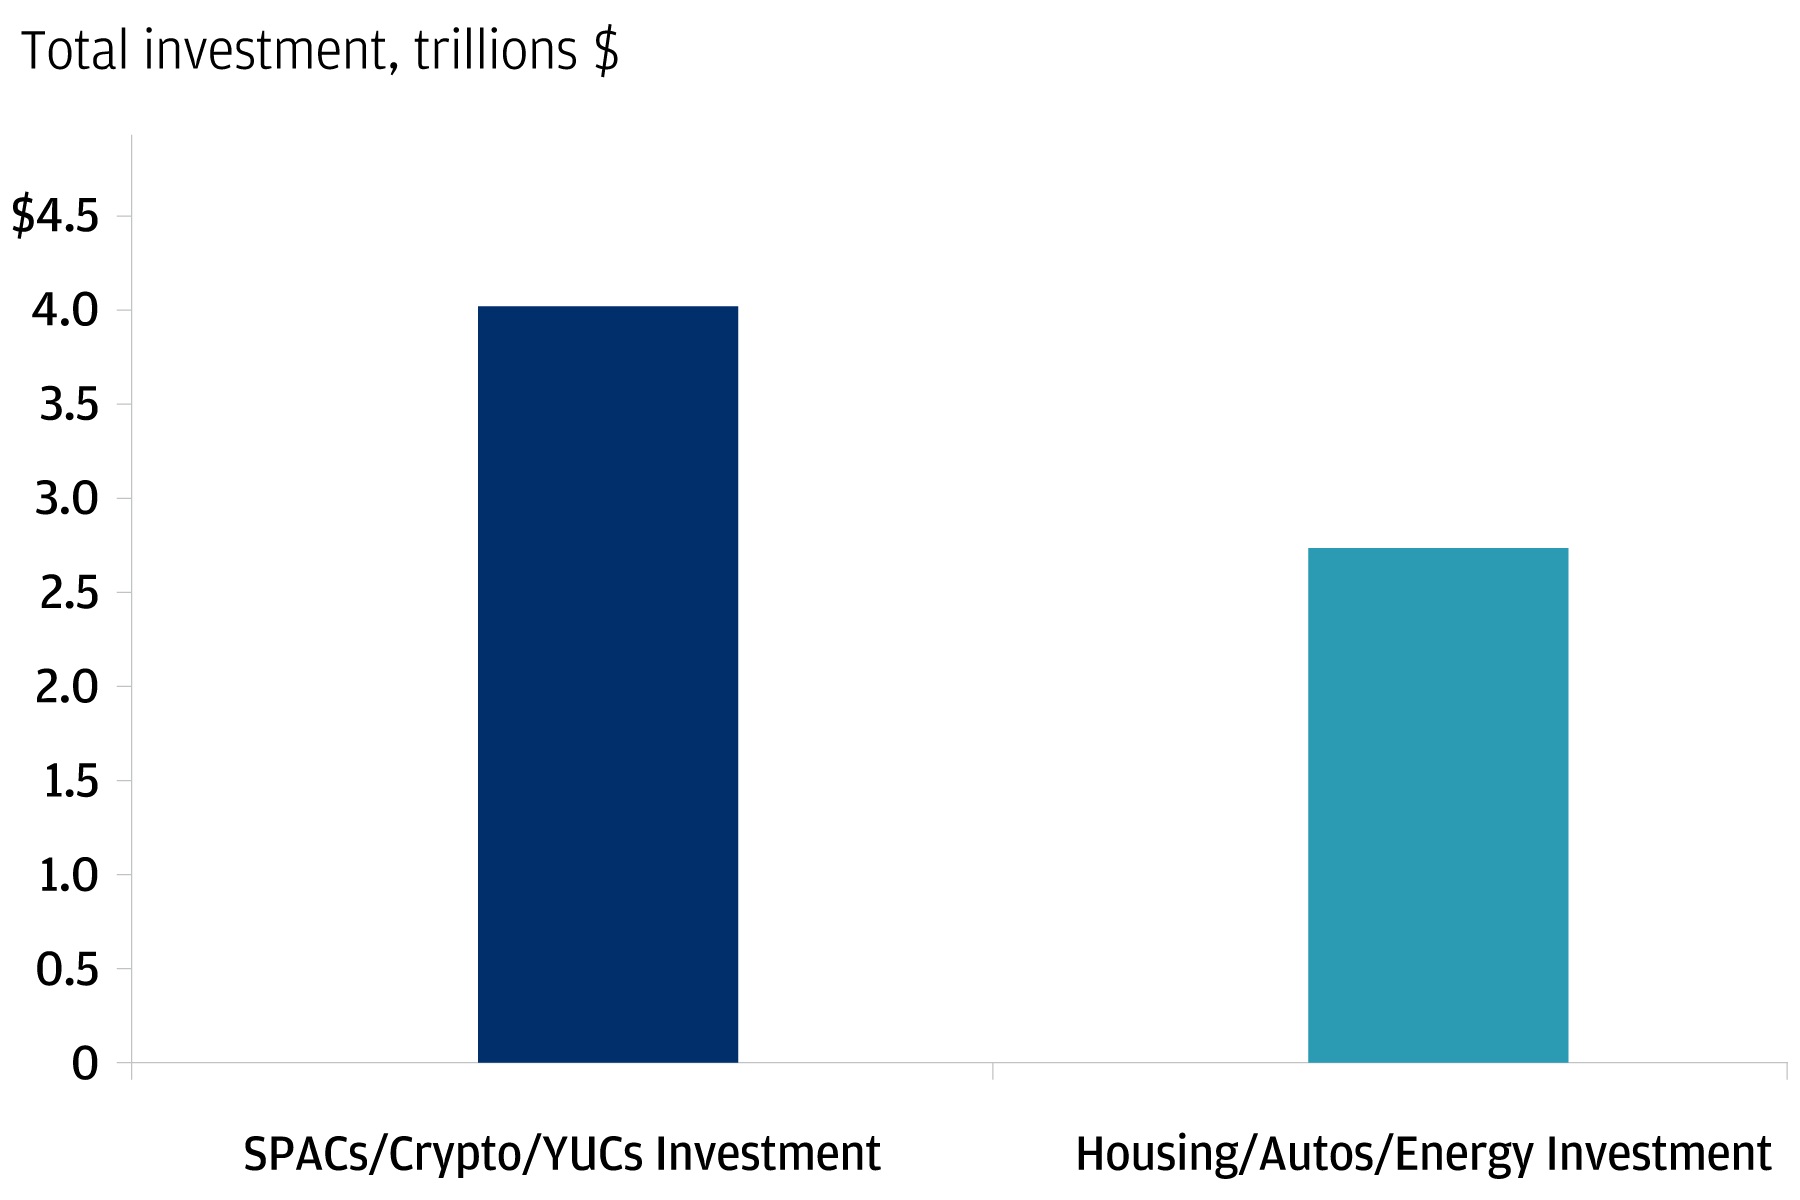 The chart shows the investments in speculative digital assets vs physical asset from 2015 to 2020.